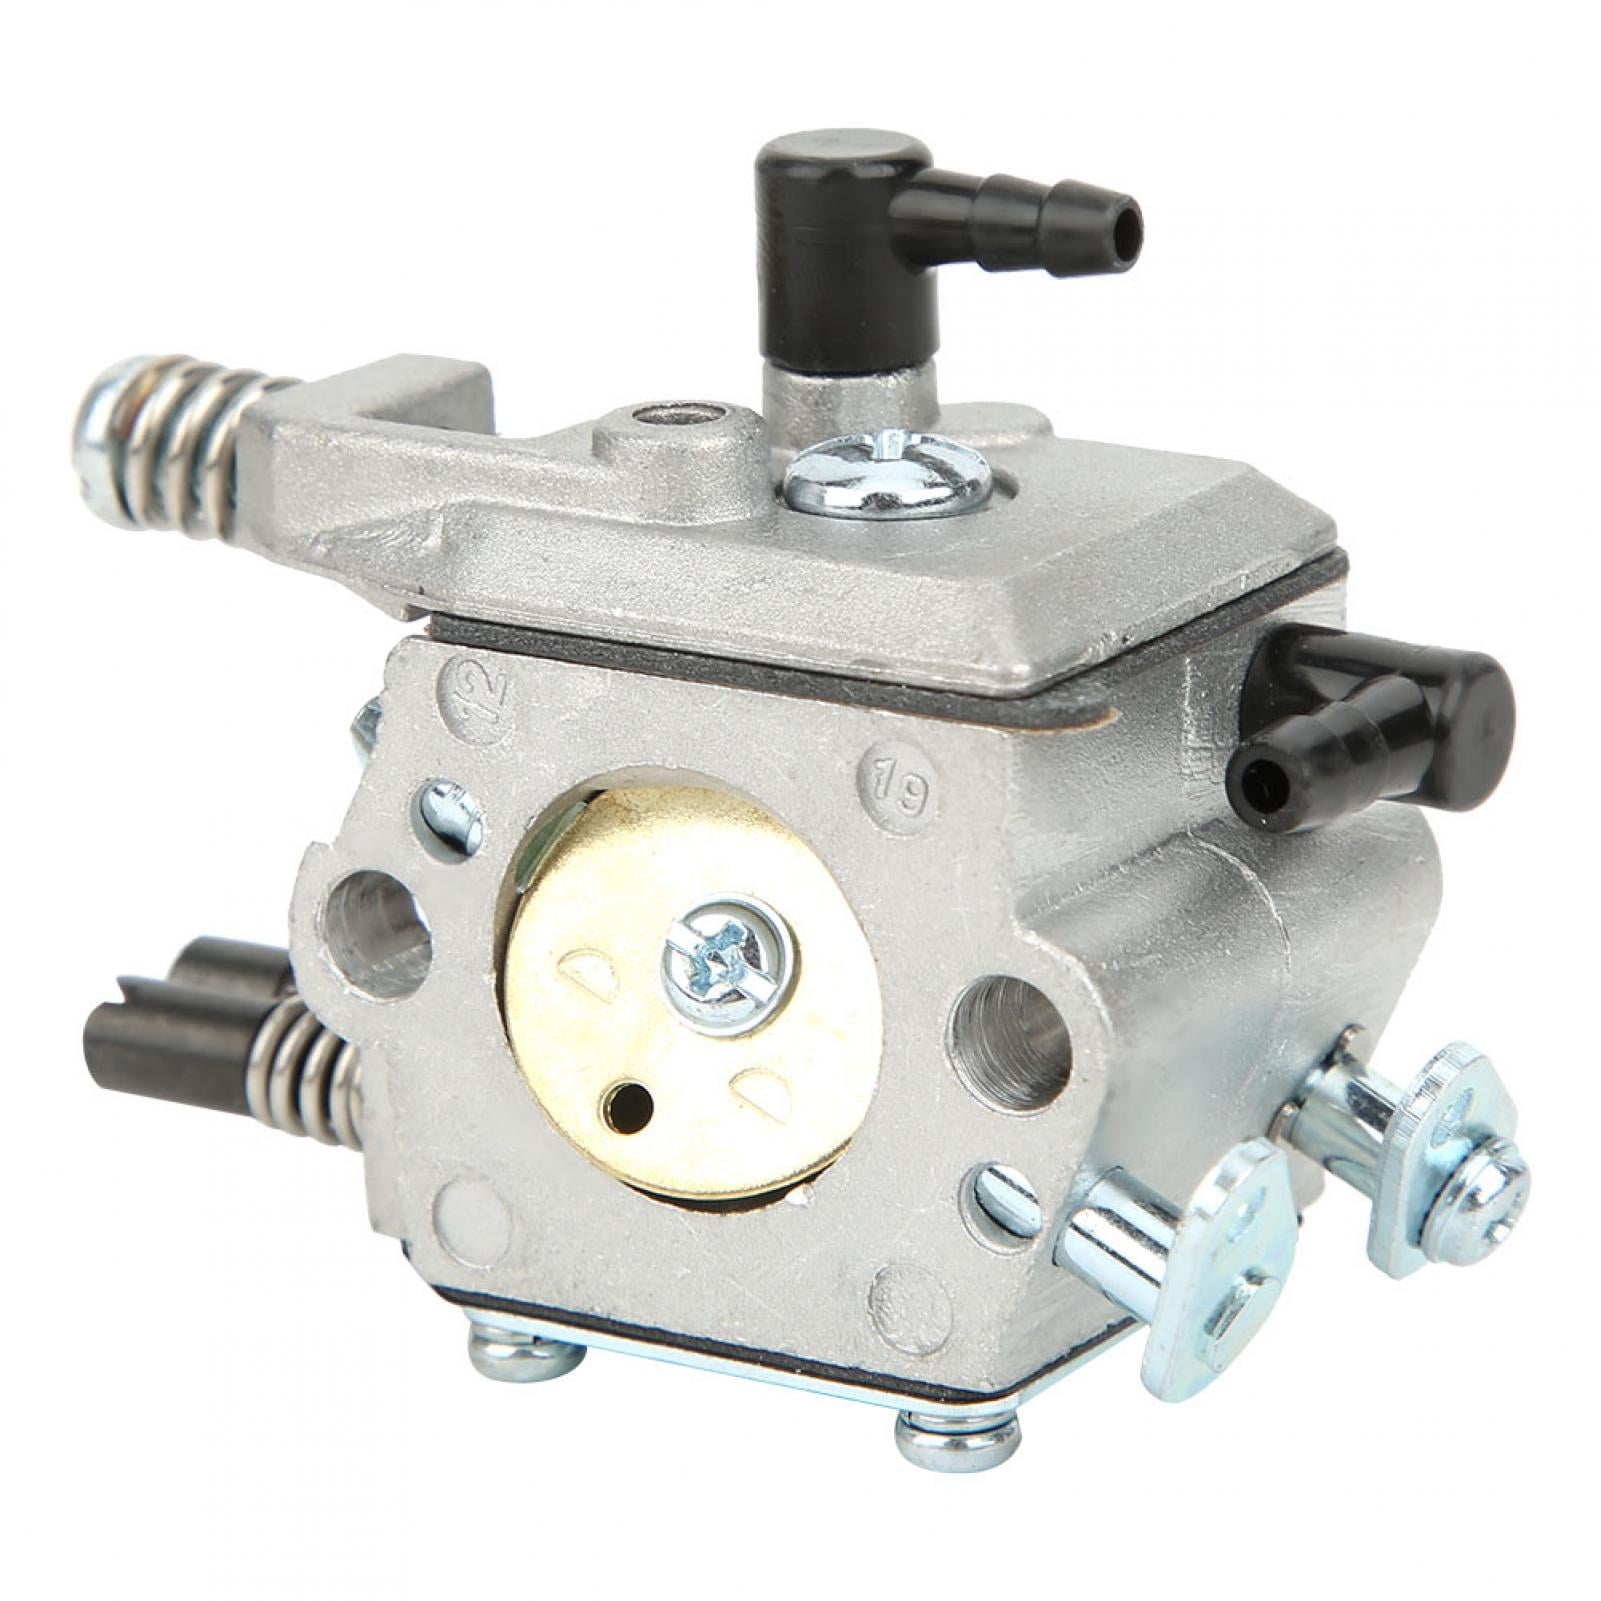 Light Weight Chainsaw Carburetor Replacement High Quality Carburetor 5200 For 